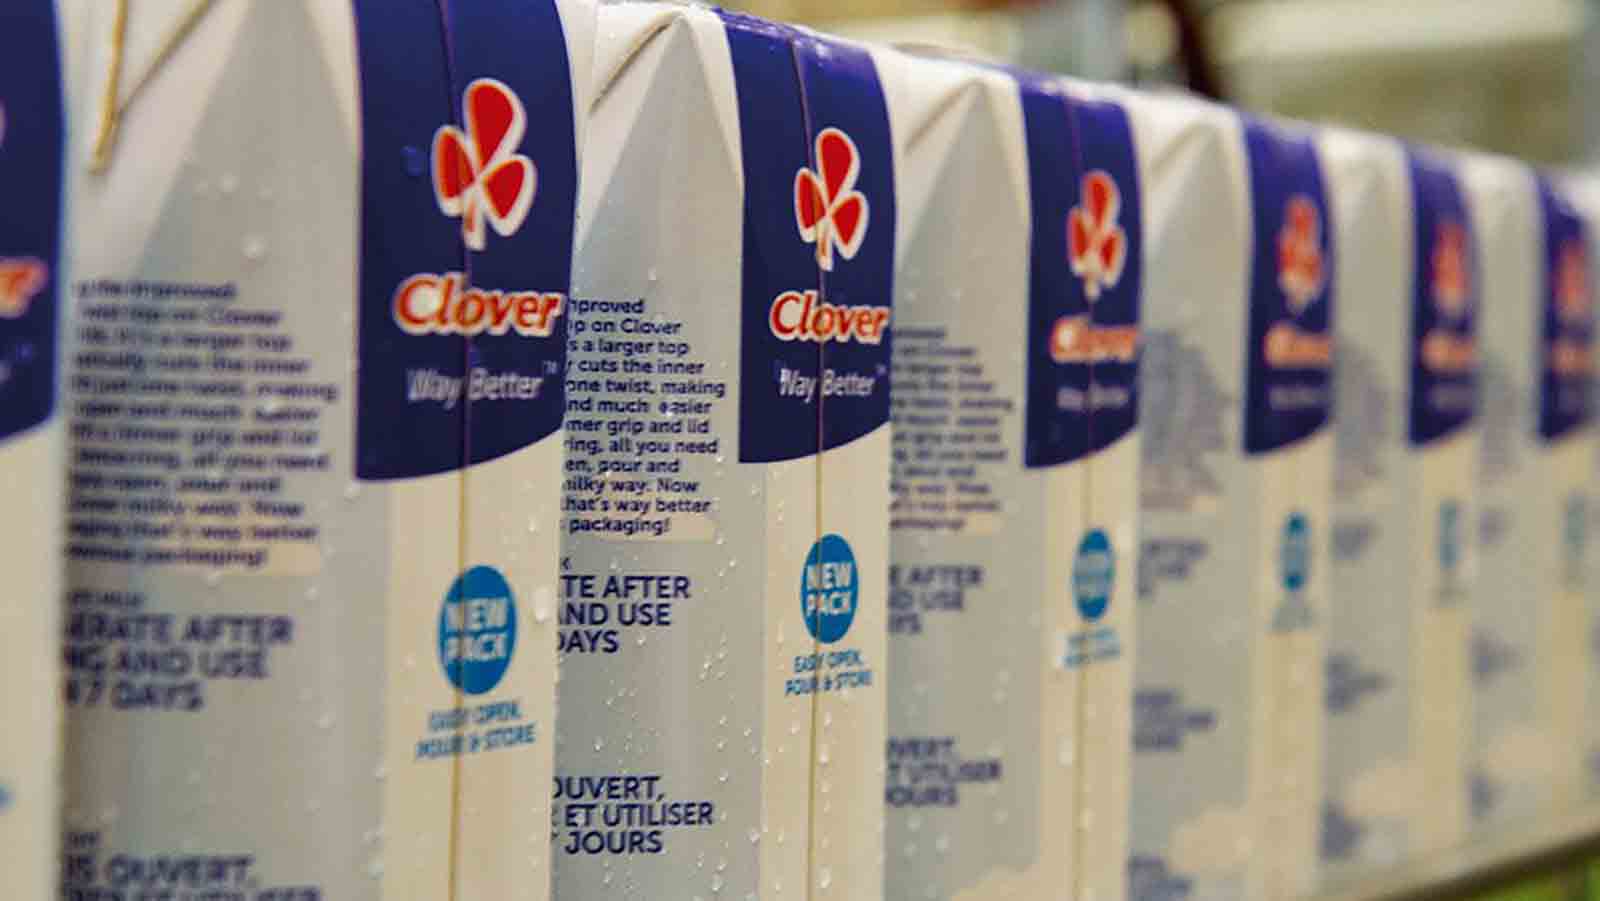 Clover SA seeks to acquire back Dairy Farmers of South Africa, gets backing from Competition Commission